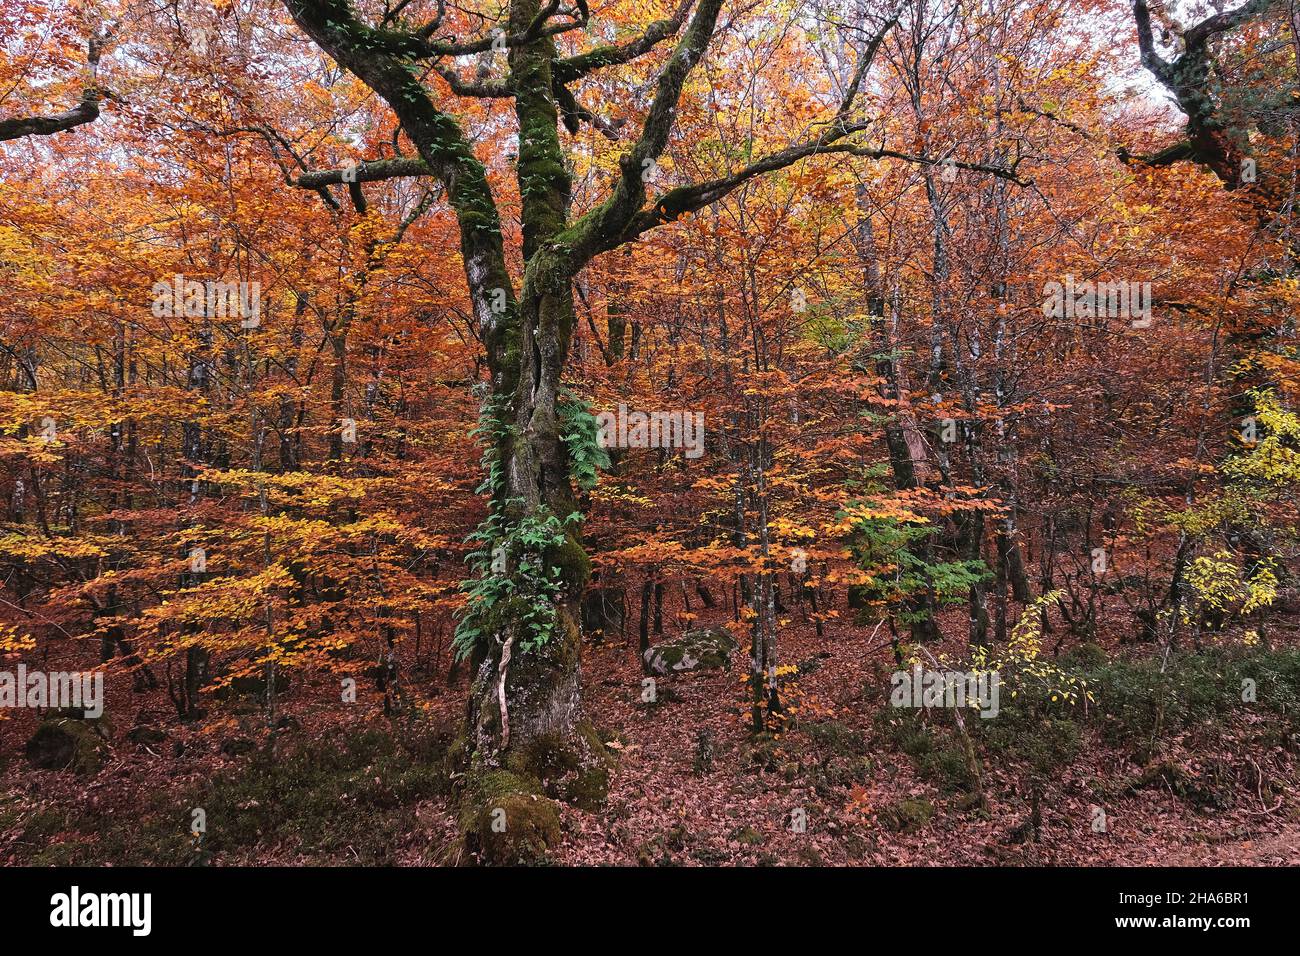 Temperate broadleaf and mixed forests with autumnal fagus sylvatica and quercus robur trees with colorful foliage in Mata da Albergaria, Peneda Geres Stock Photo